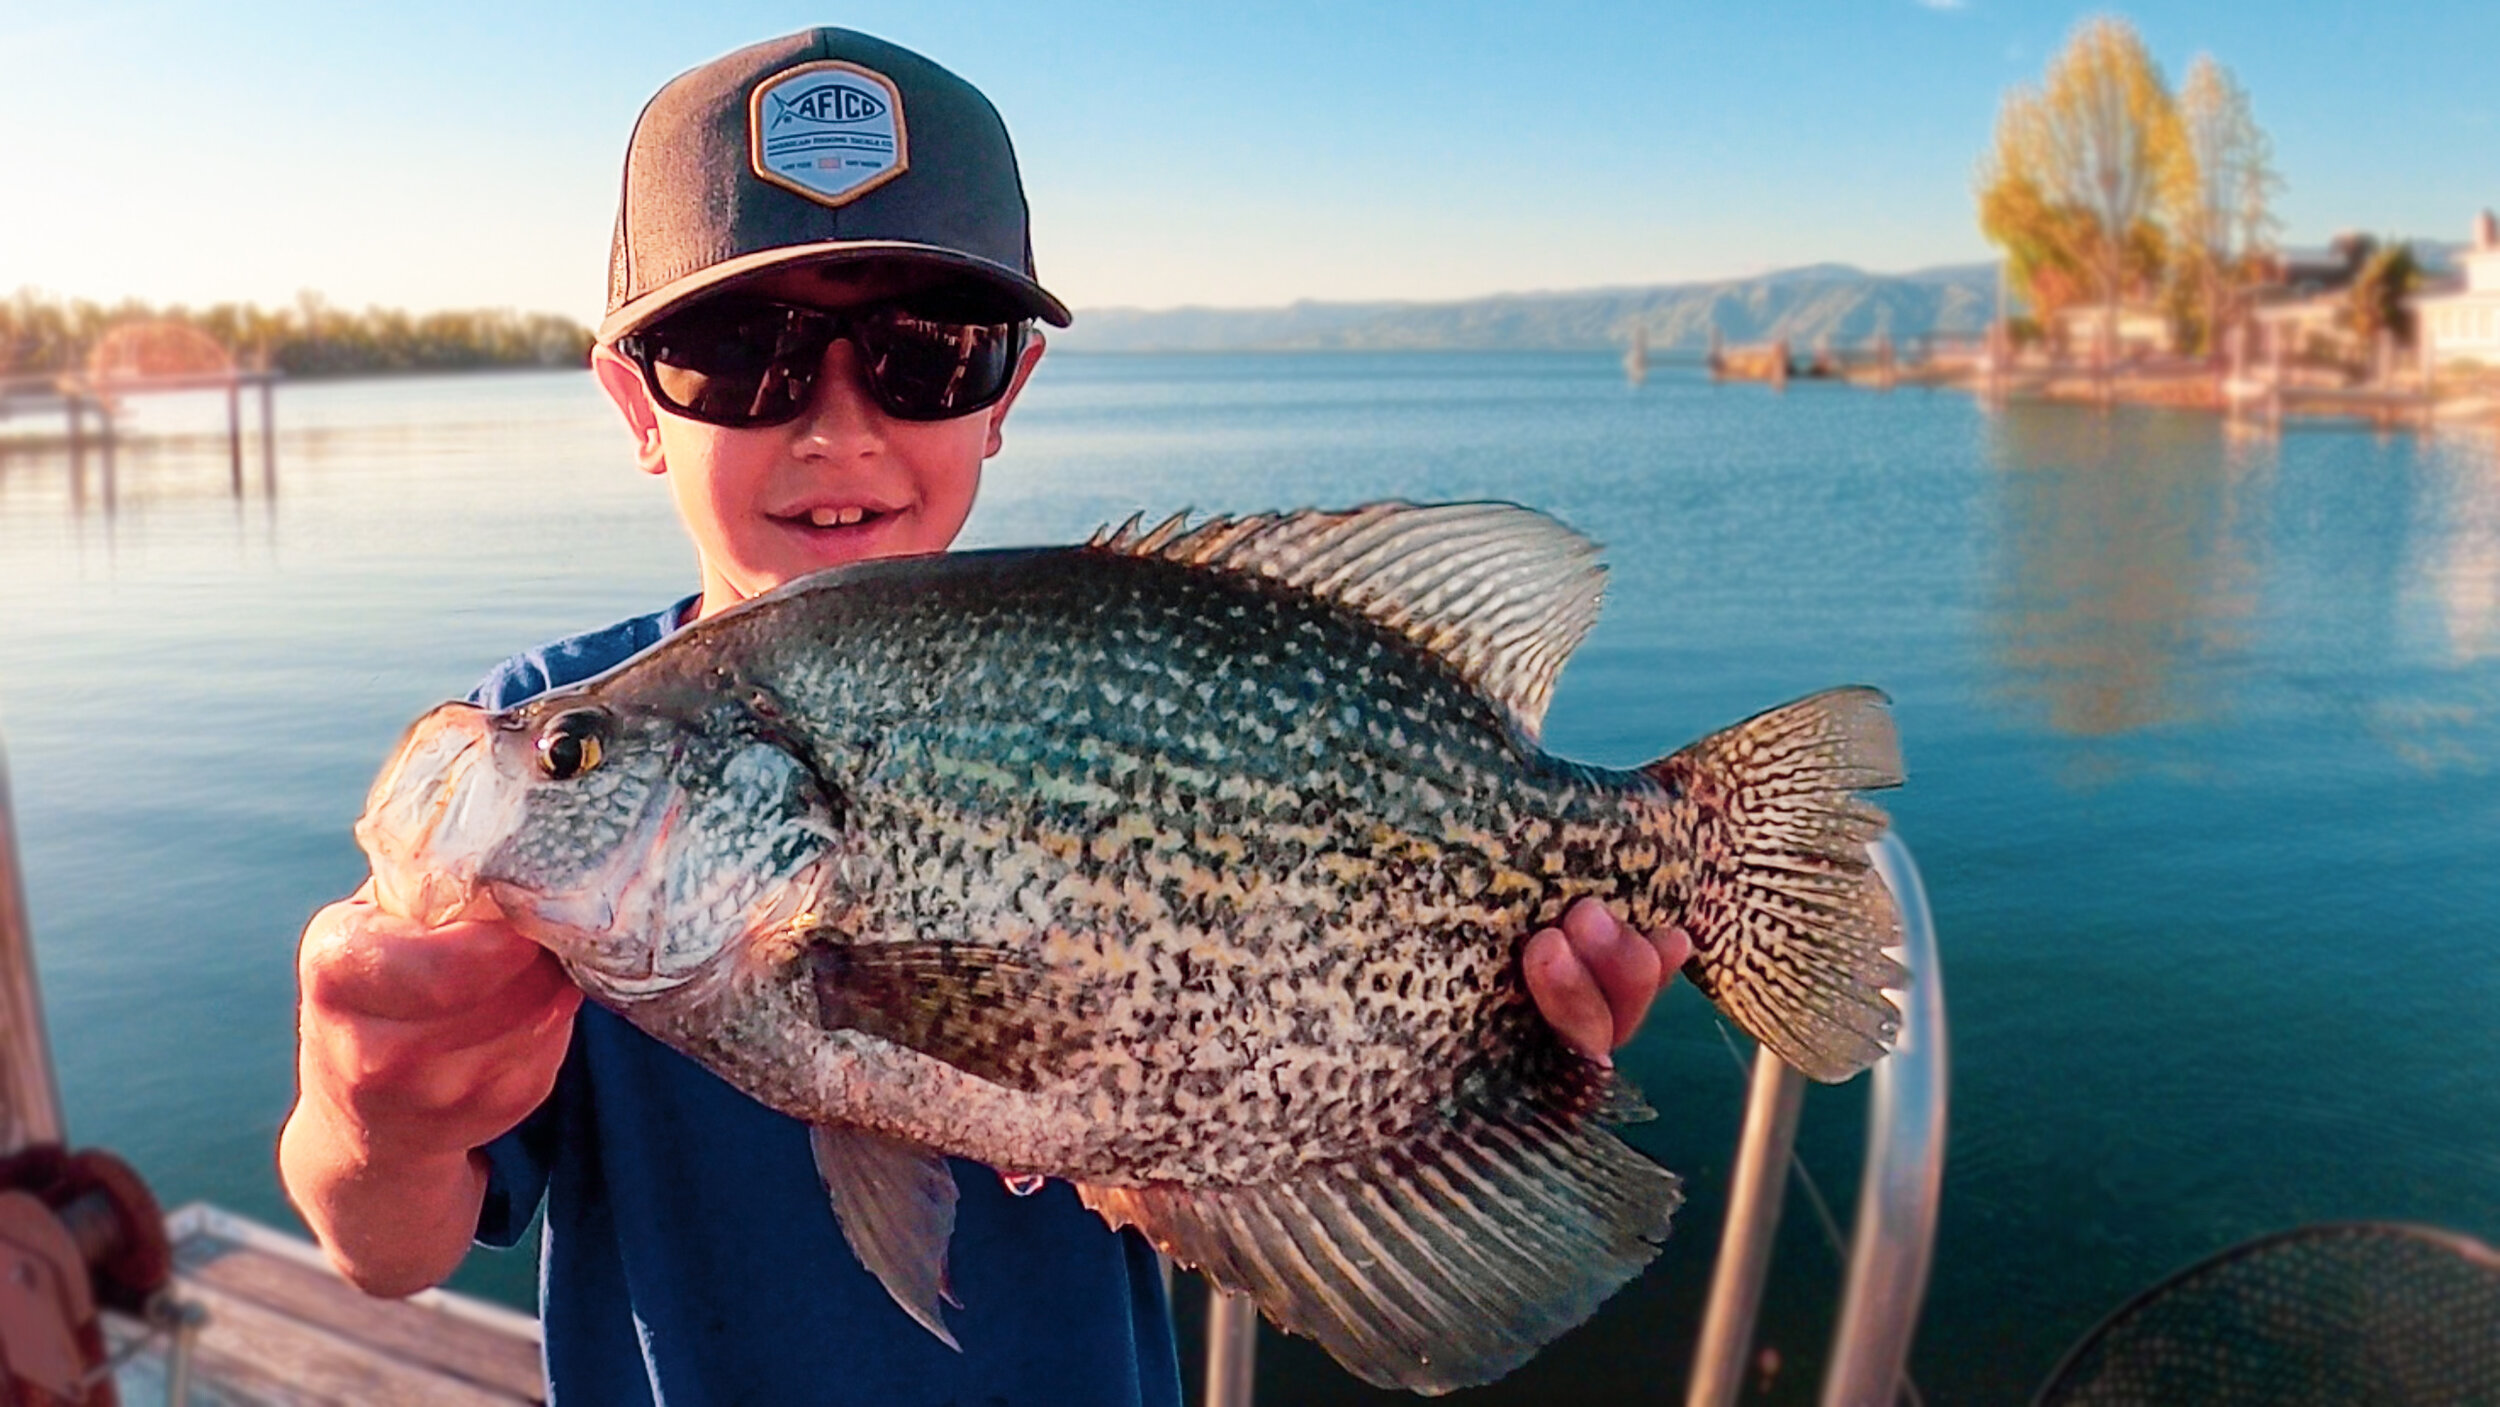 Catching Big Slab Crappie From My Dock! — Tactical Bassin' - Bass Fishing  Blog